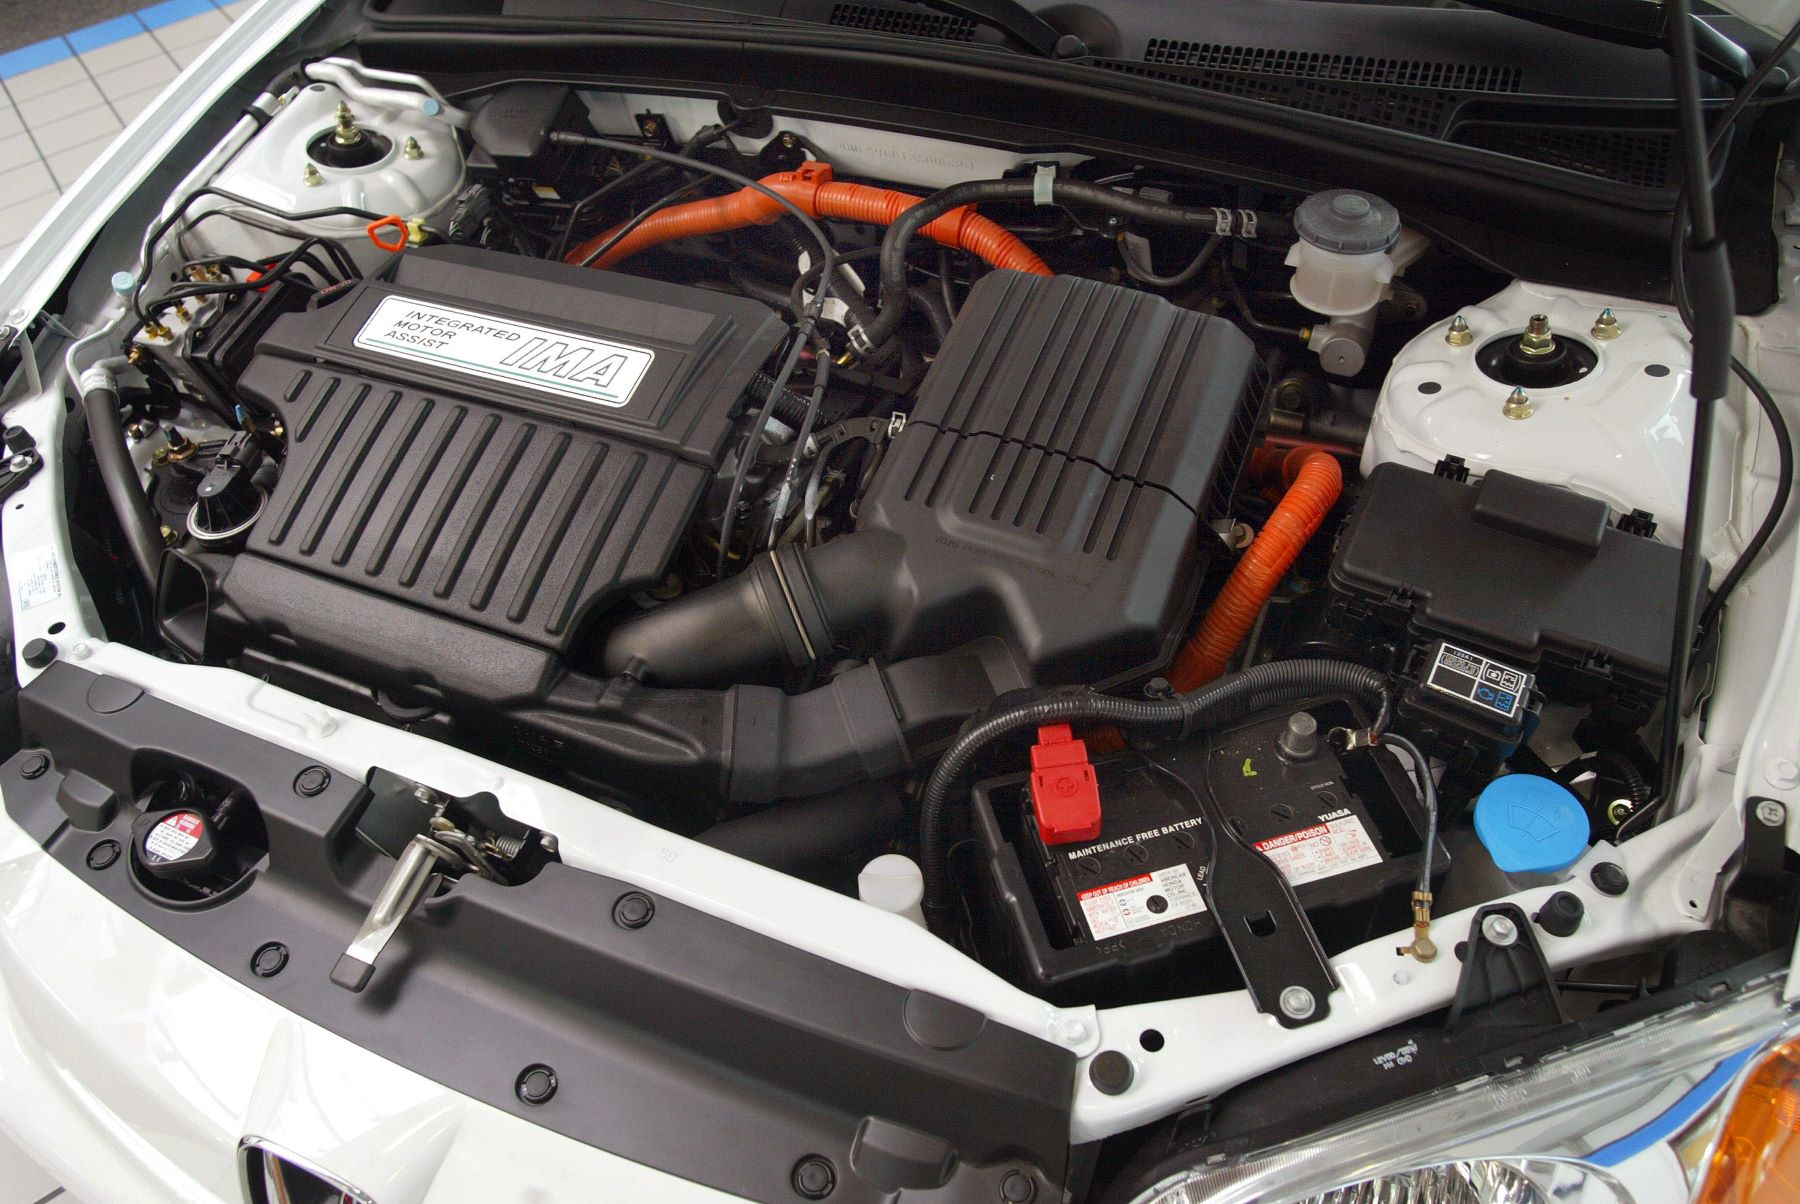 Looking at the engine and powertrain setup under the hood of a 2003 Honda Civic Hybrid